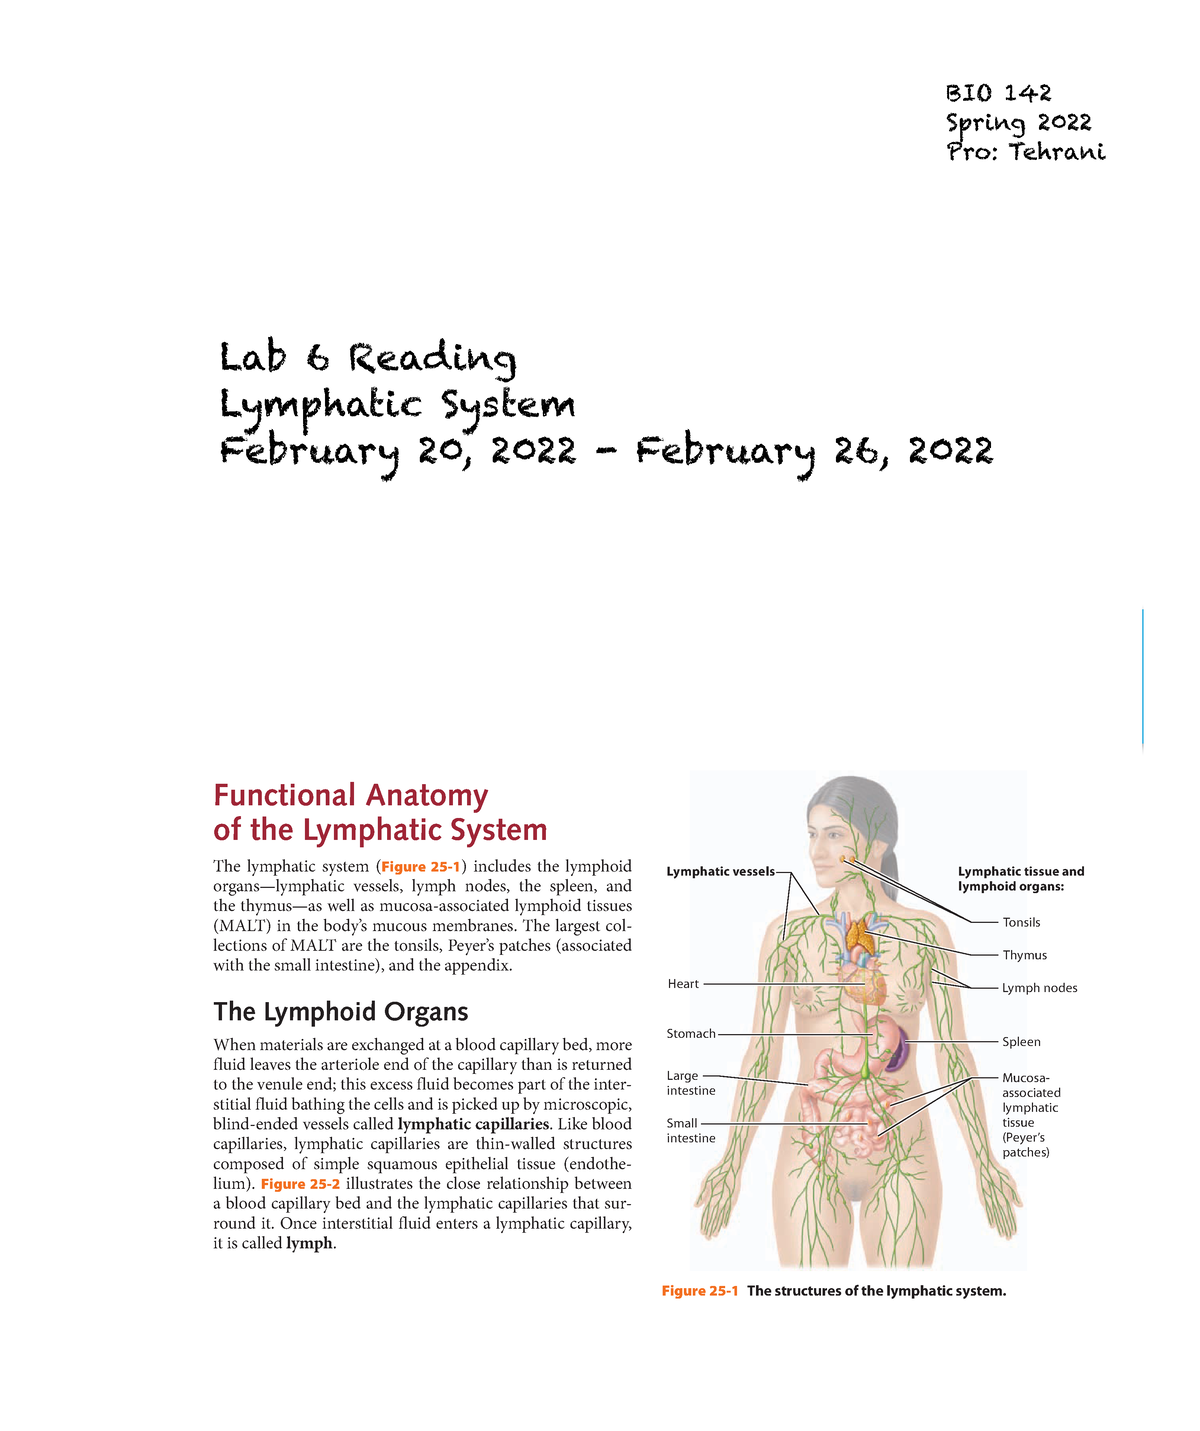 lymphatic system assignment pdf